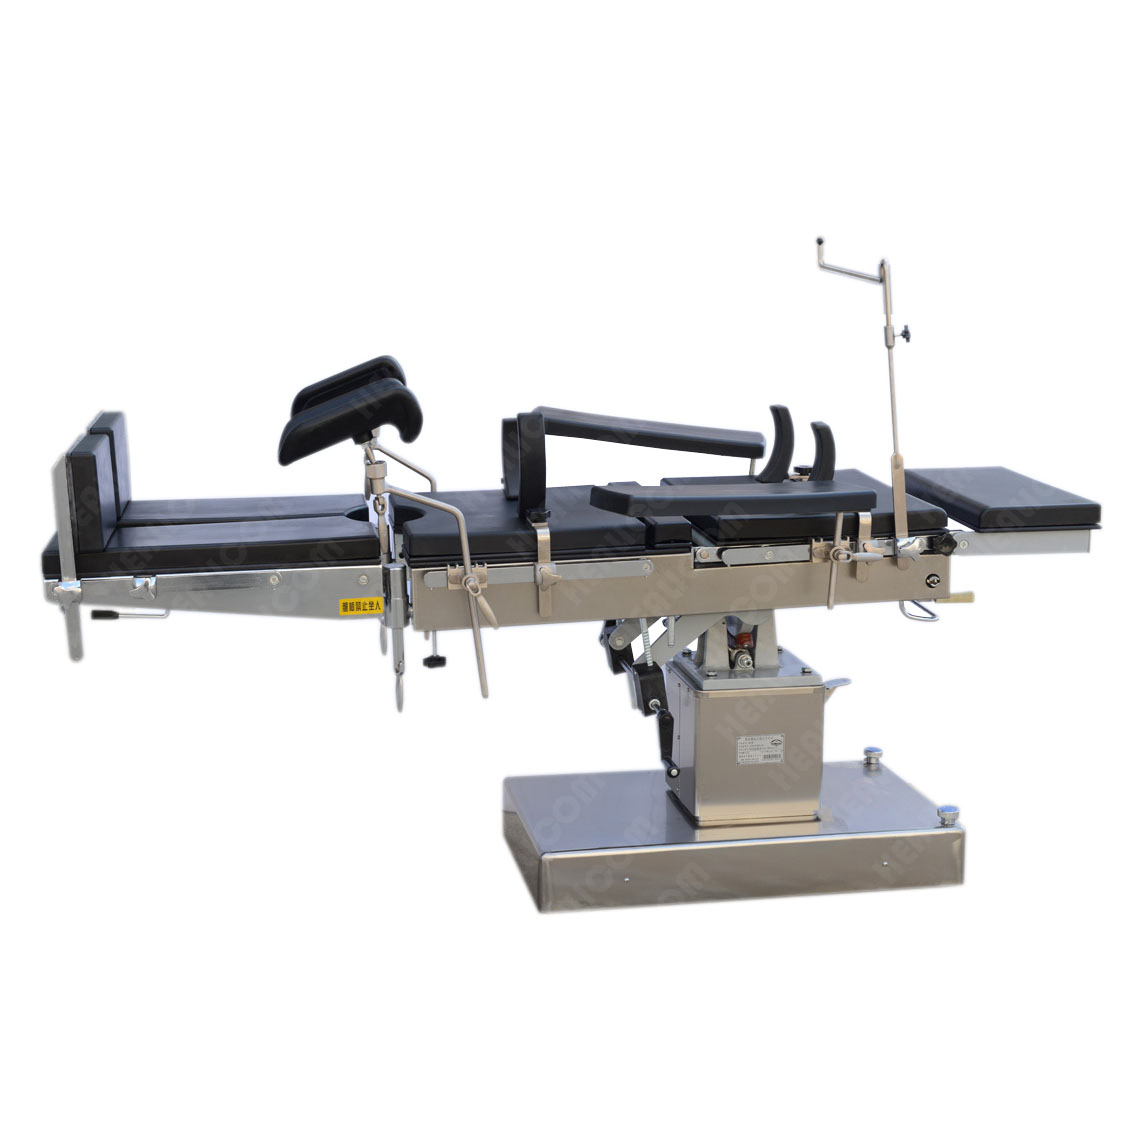 3002 Multi-purpose Hydraulic Stainless Steel Manual Operating Table